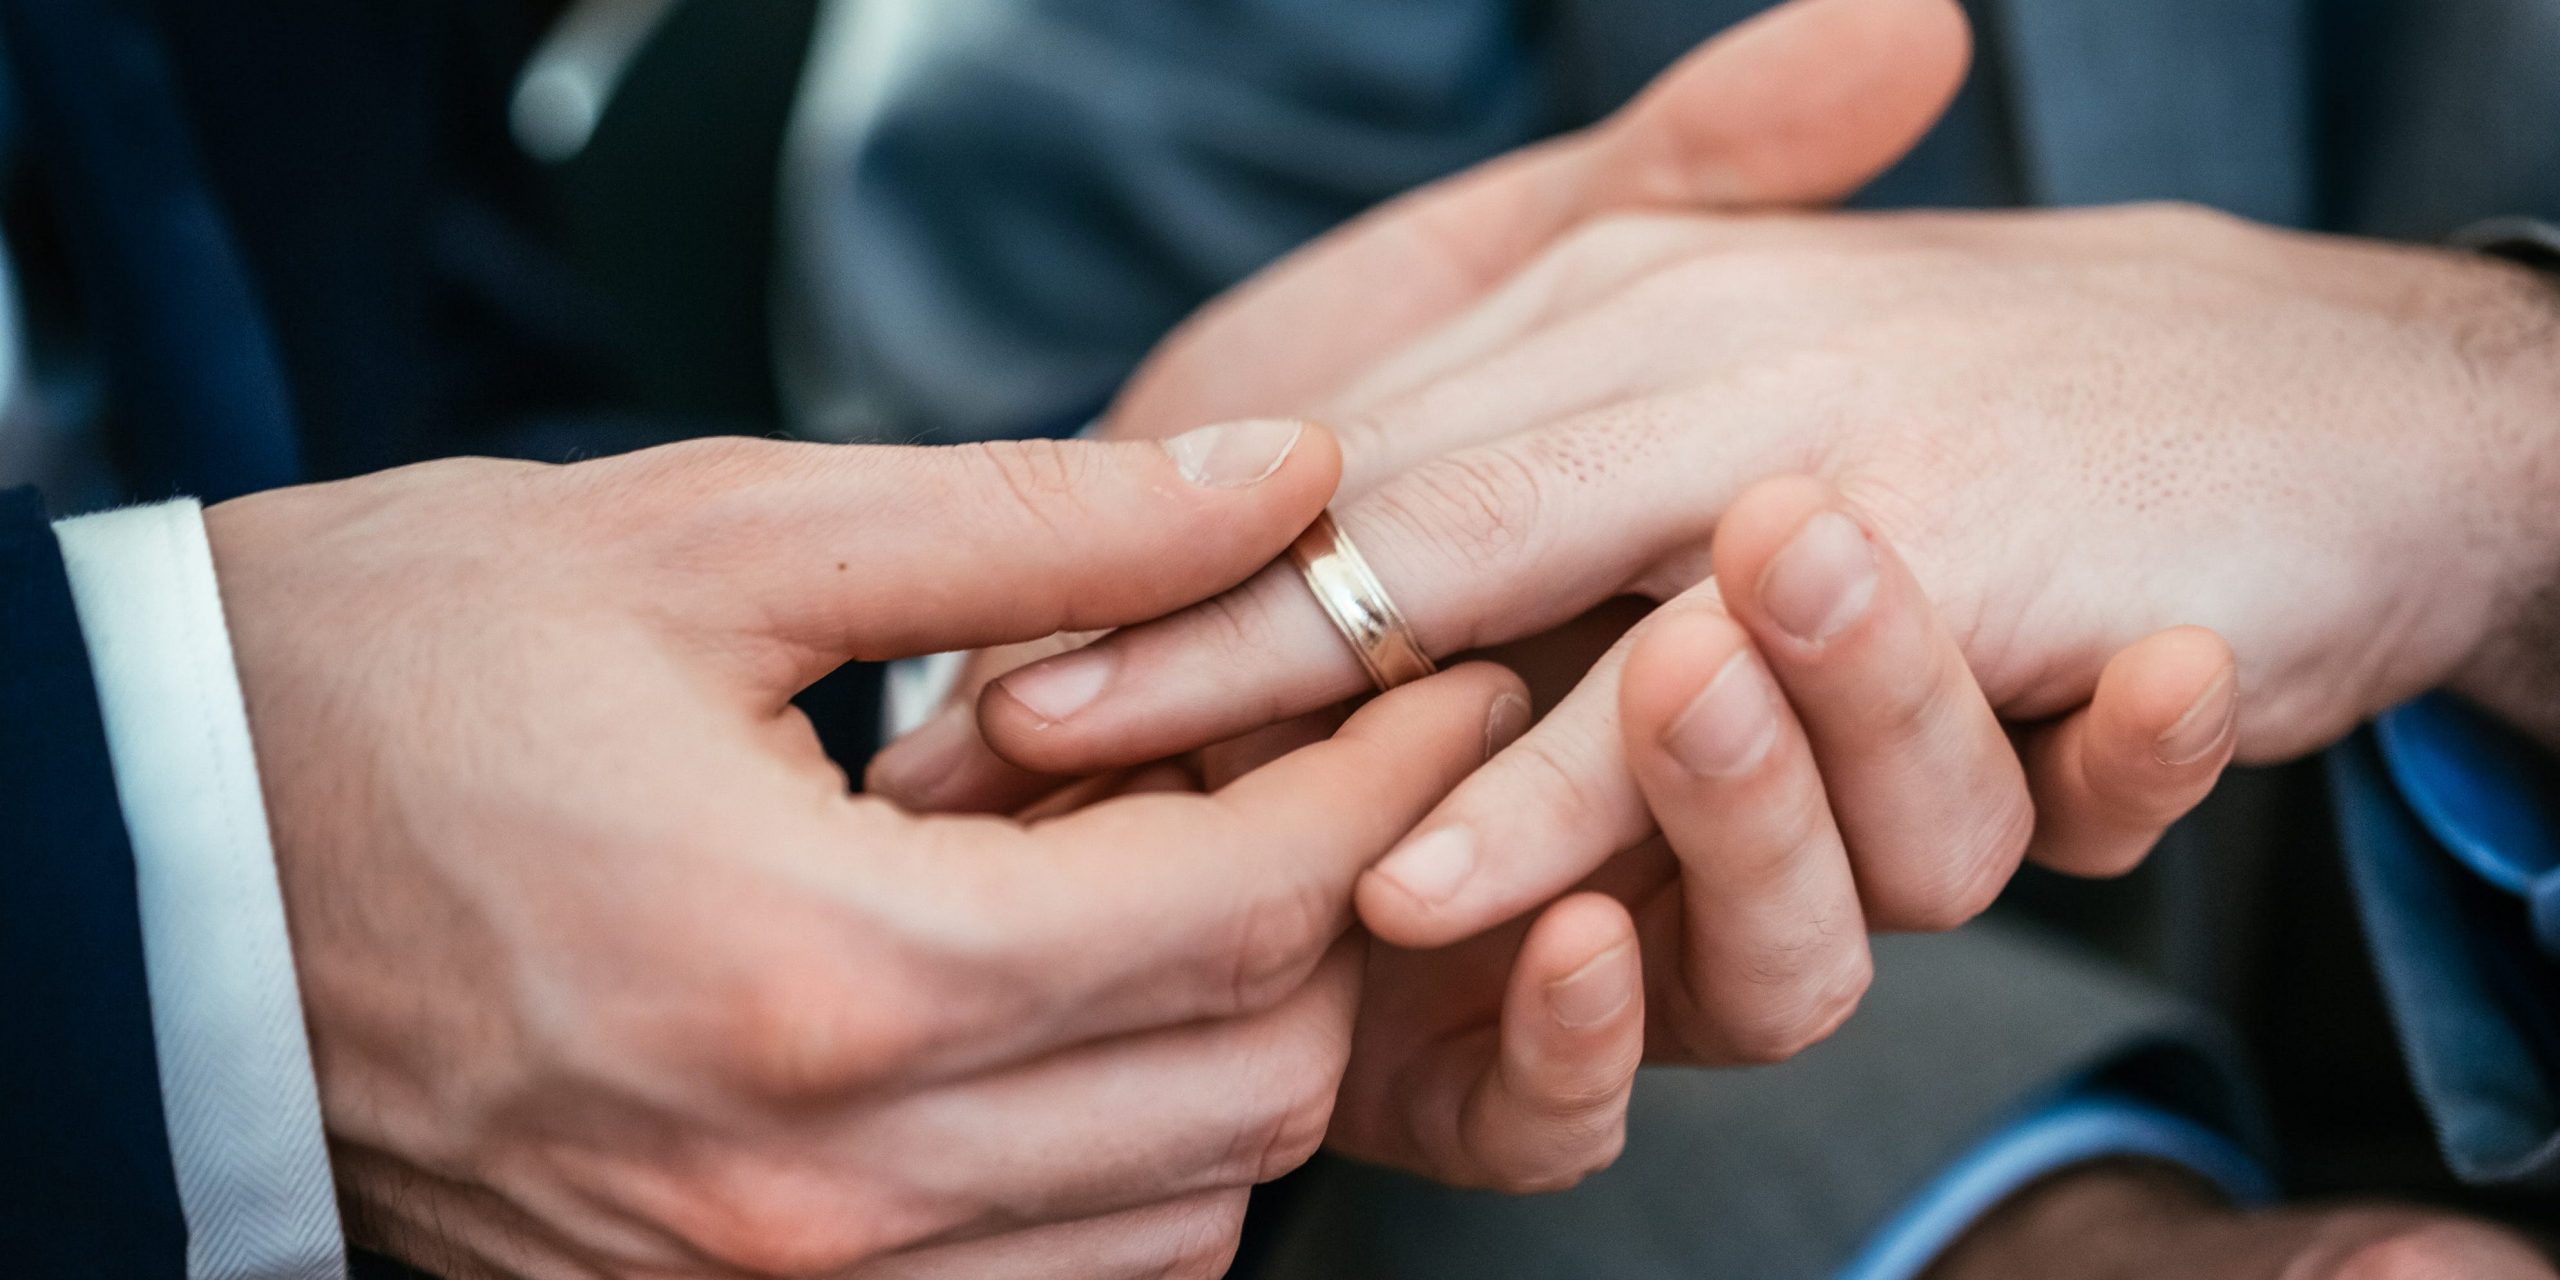 A man puts a wedding ring on another man's hand.